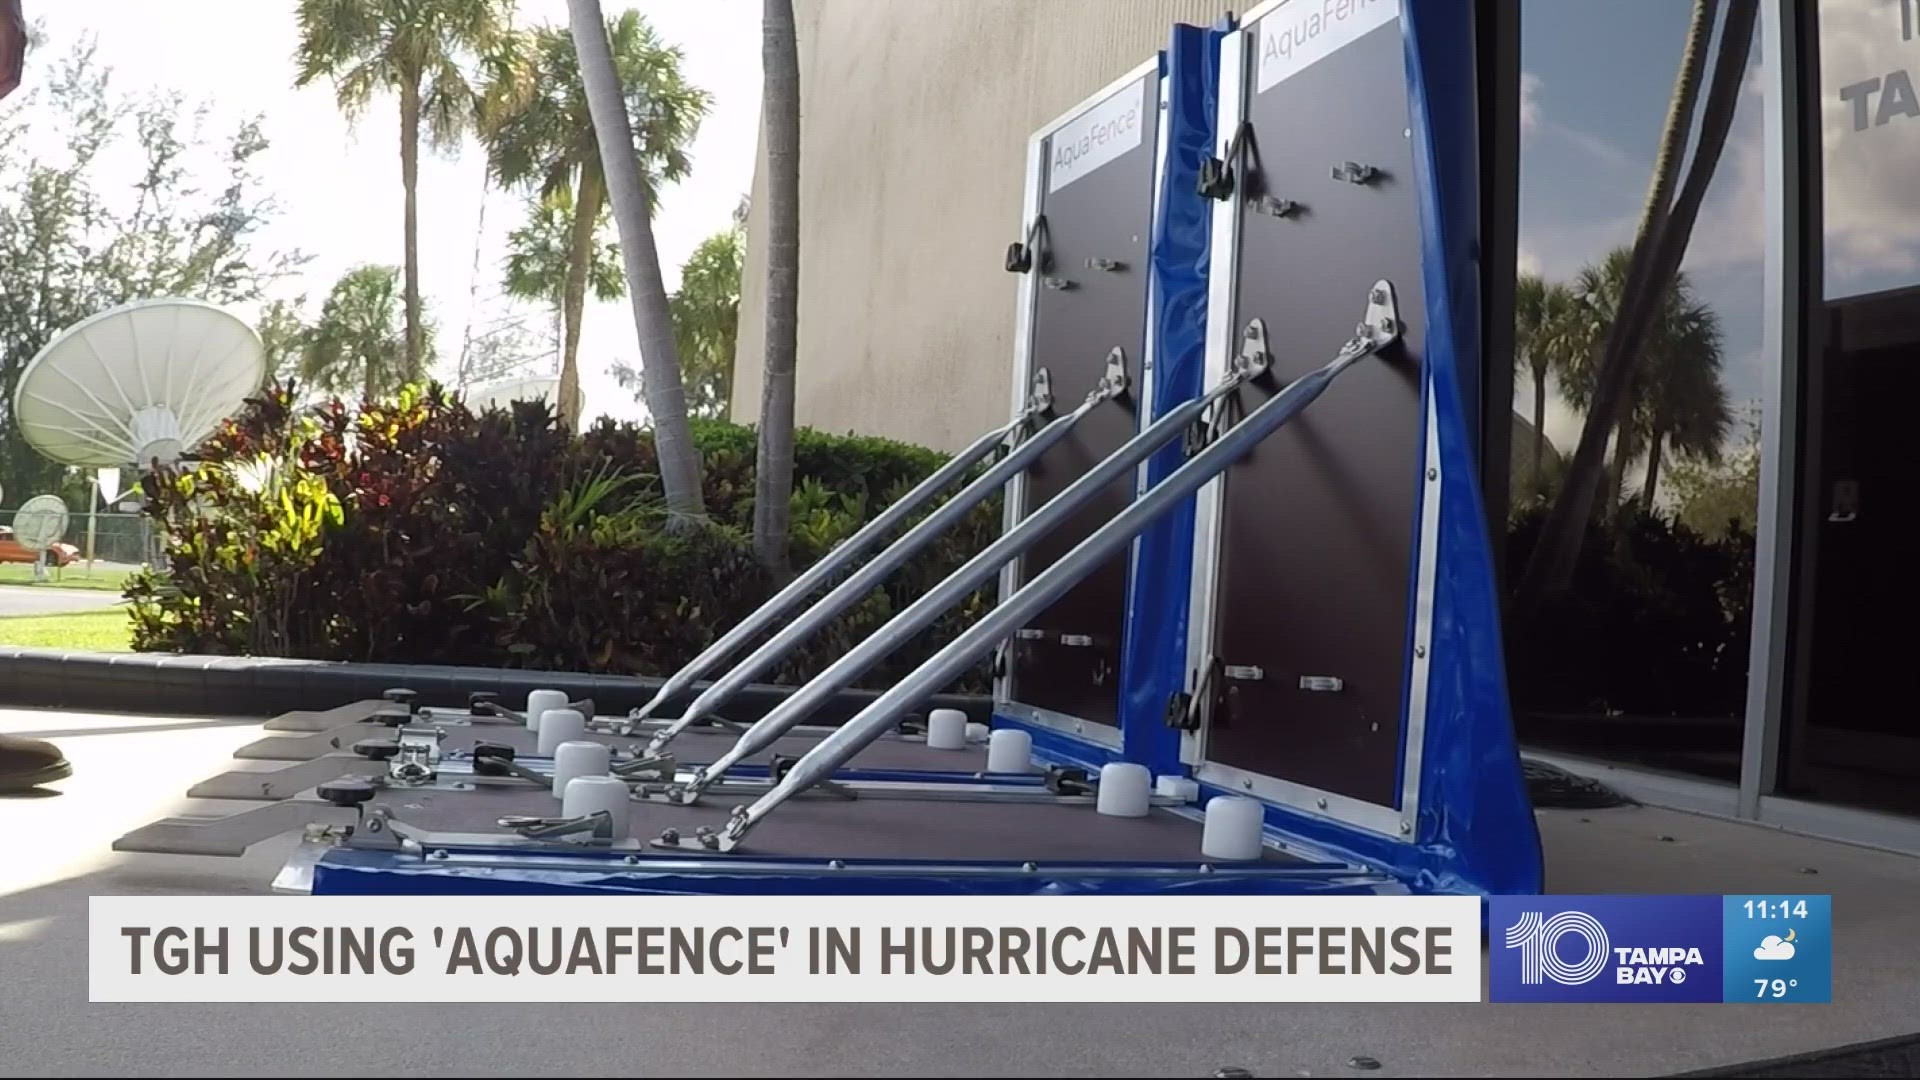 AquaFence guarded Tampa General Hospital for the first time during Hurricane Ian. TGH is the region's only level-one trauma center.